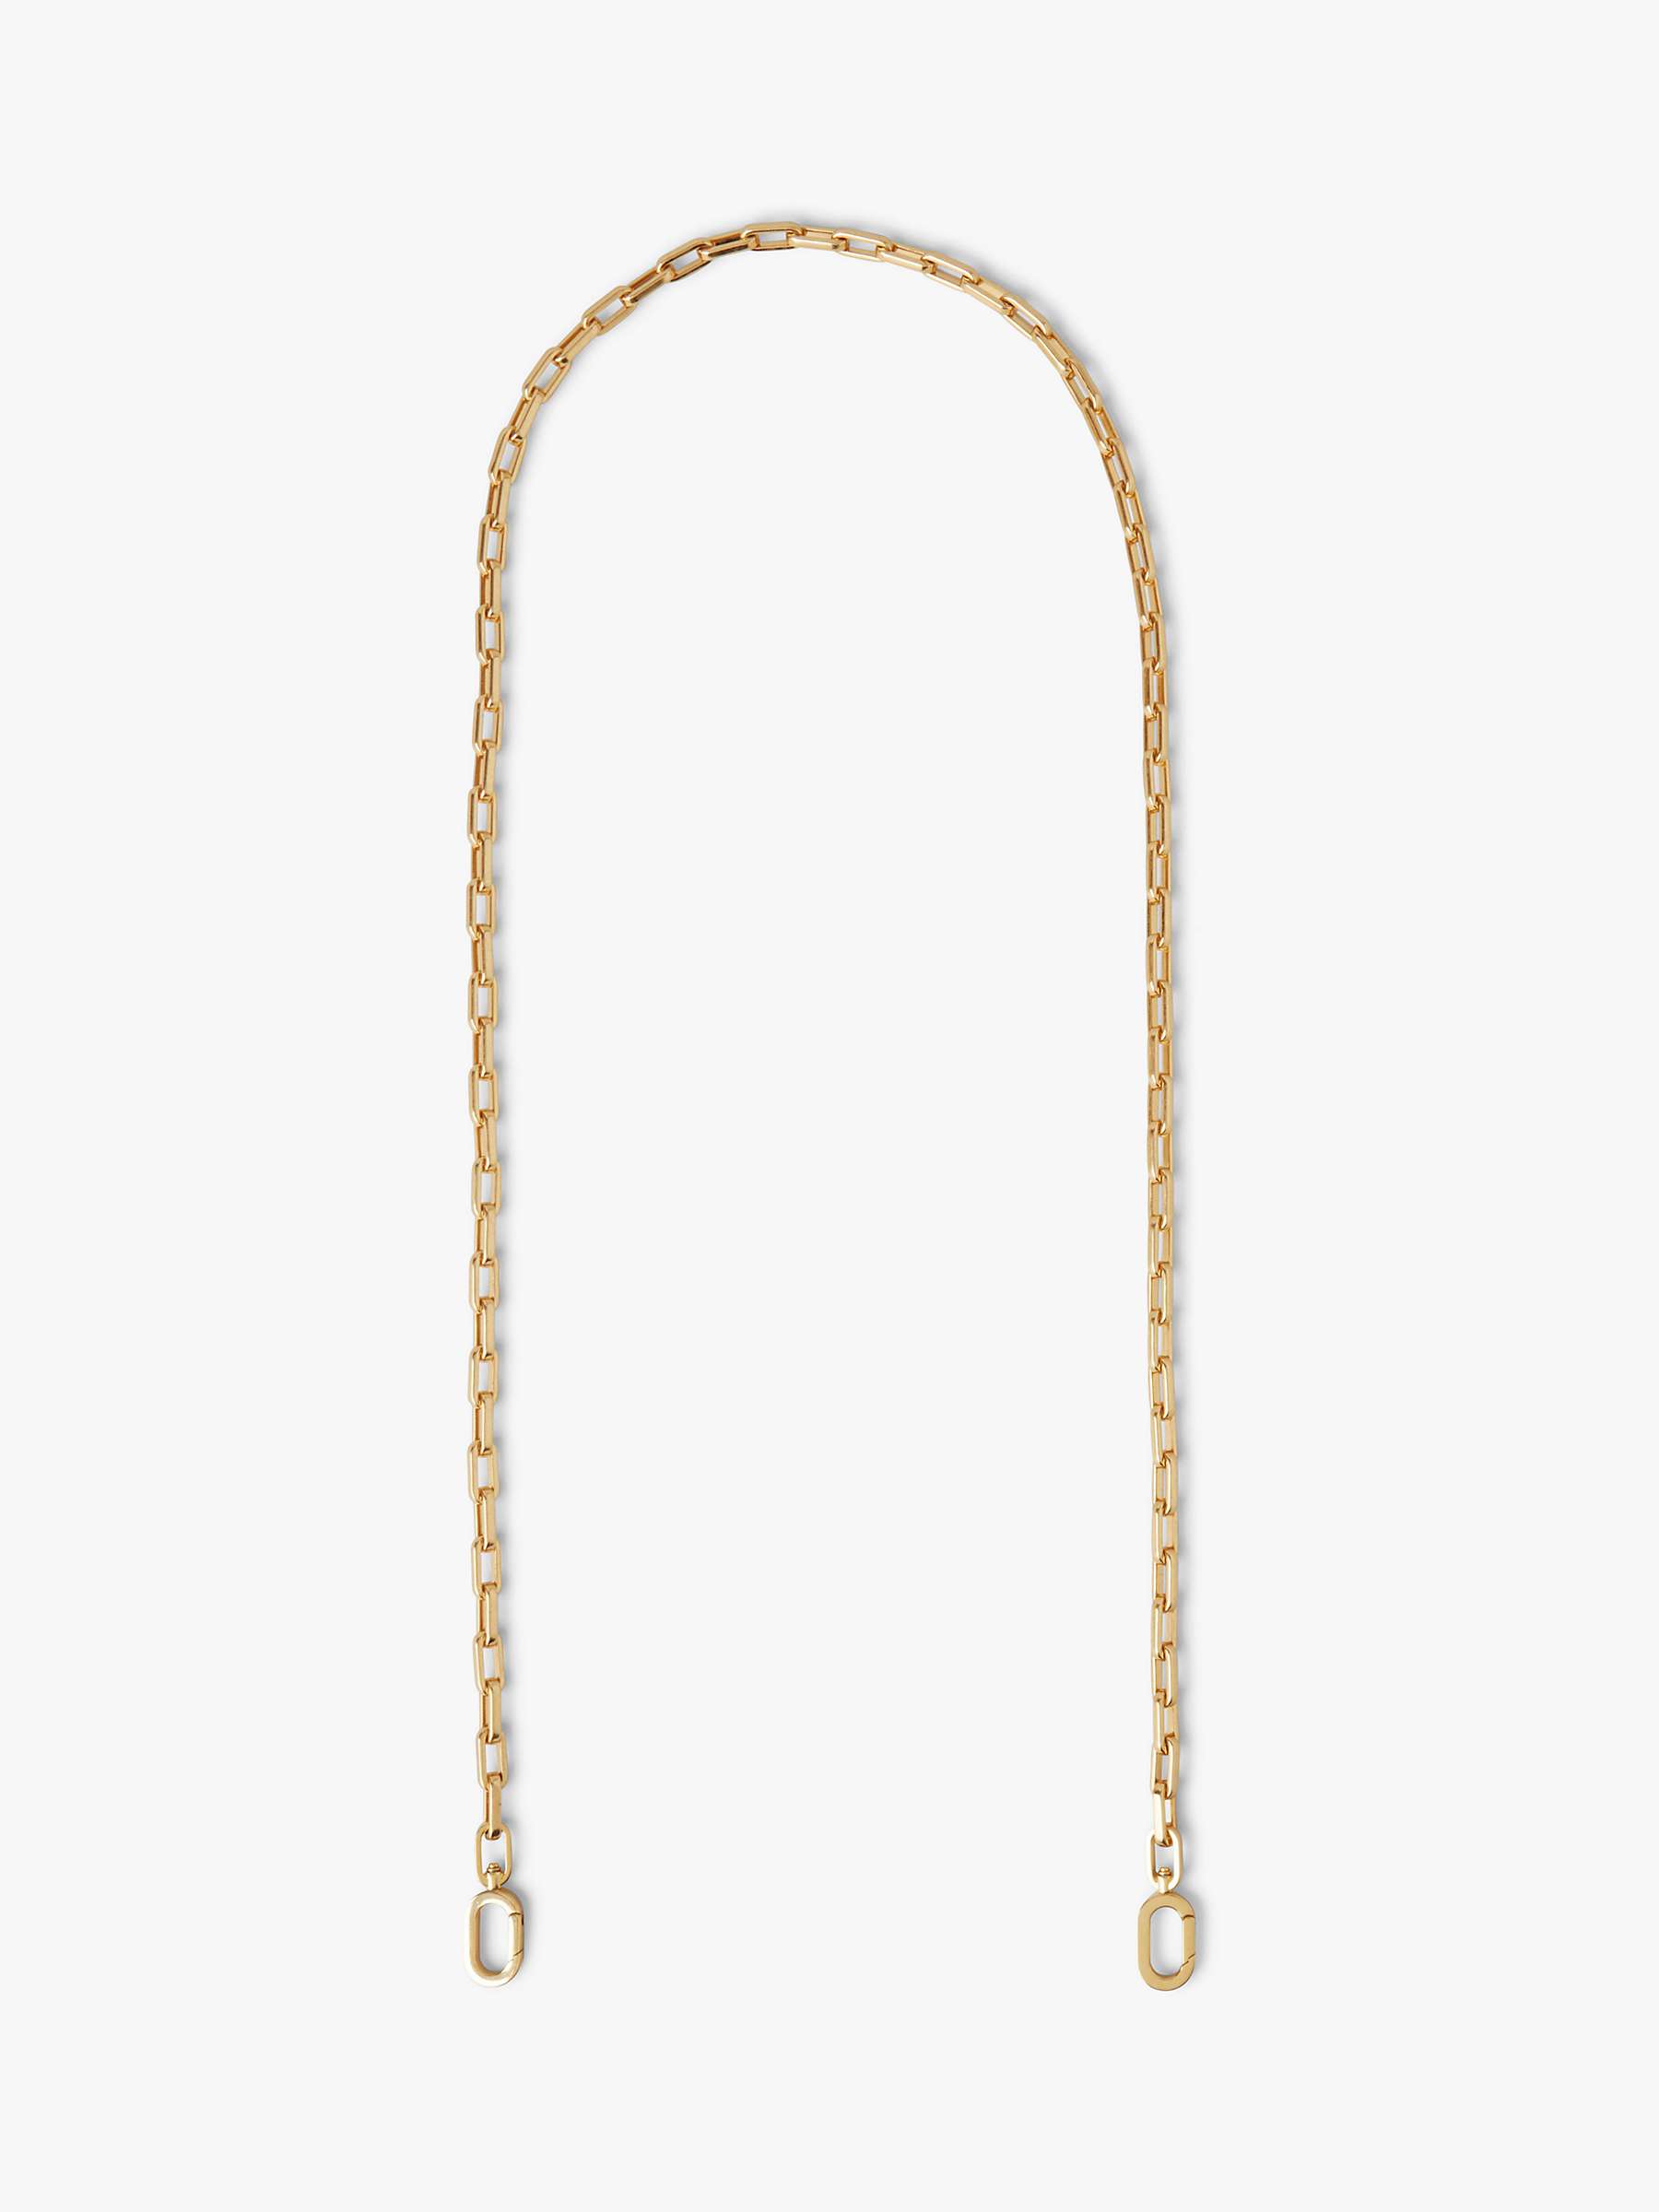 Buy Mulberry Softie Metal Chain Strap, New Brass Online at johnlewis.com